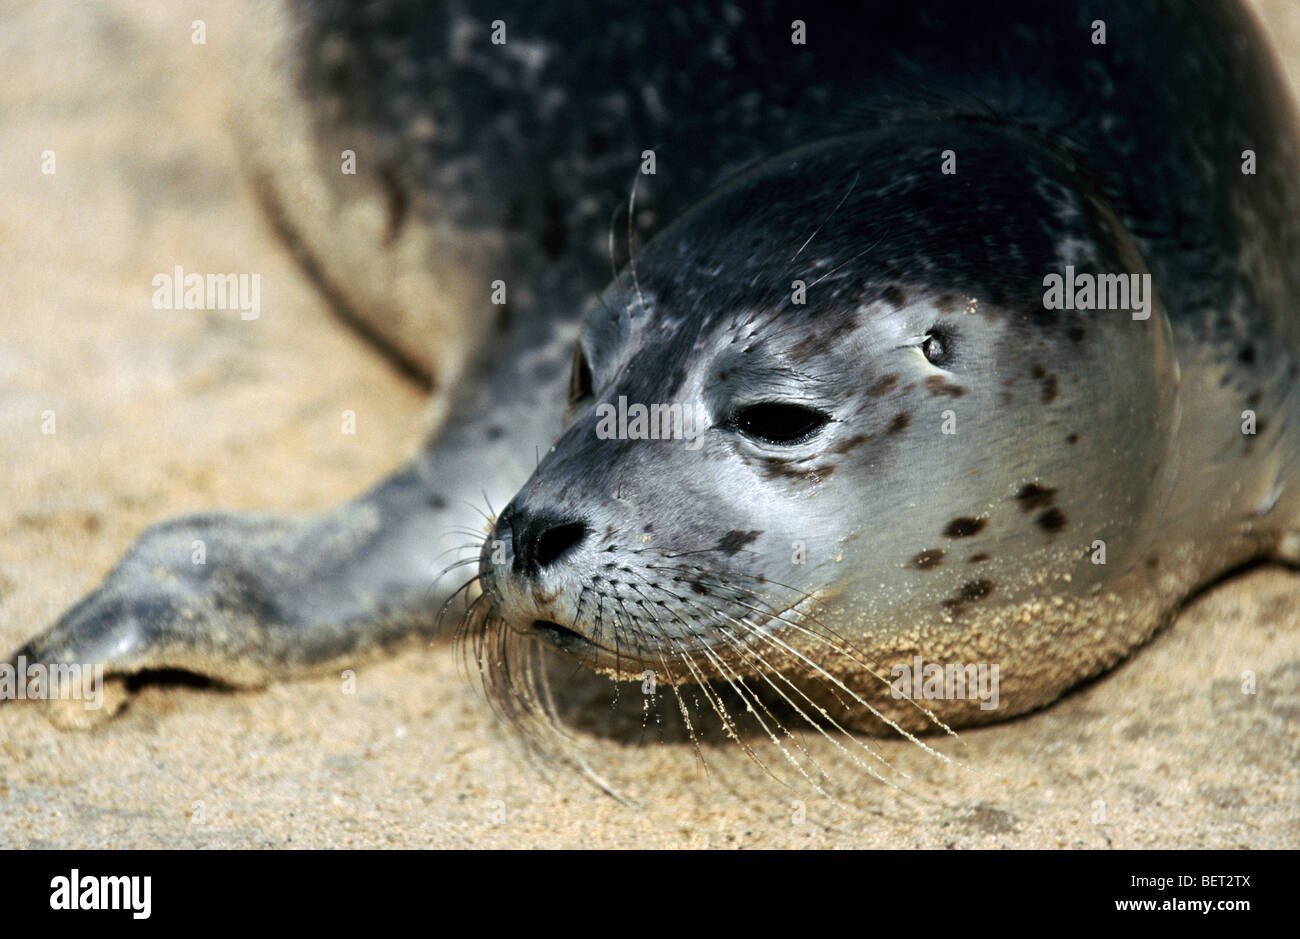 Young harbour seal / common seal (Phoca vitulina) on the beach Stock Photo